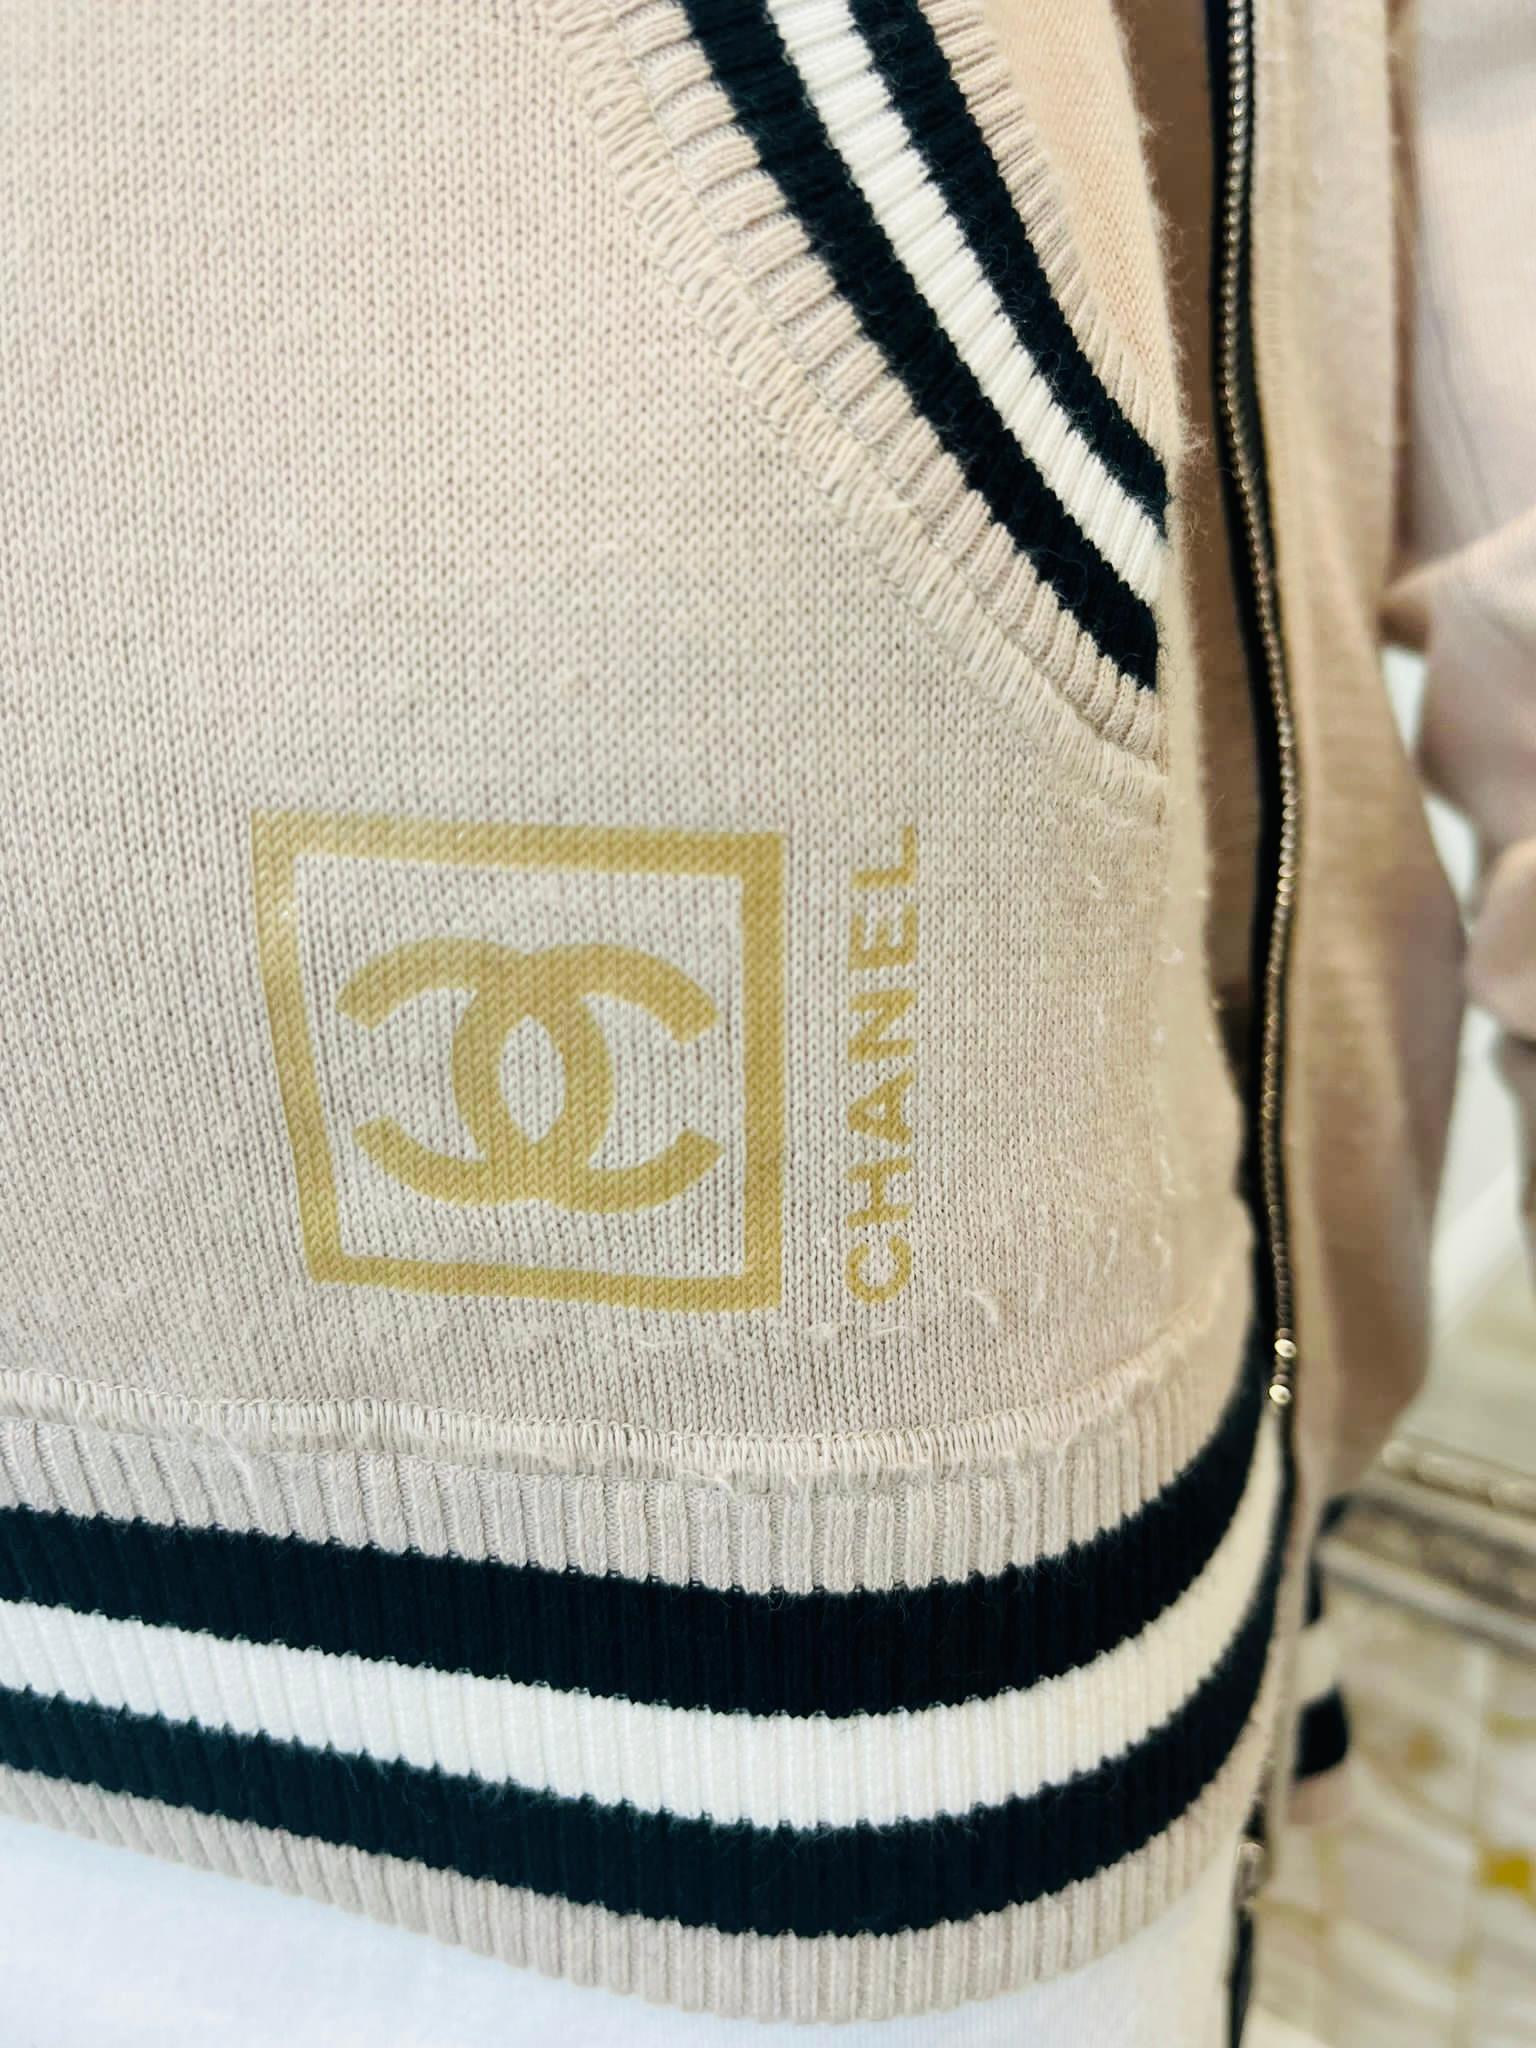 Chanel Cotton Top & Matching Hoodie For Sale 3